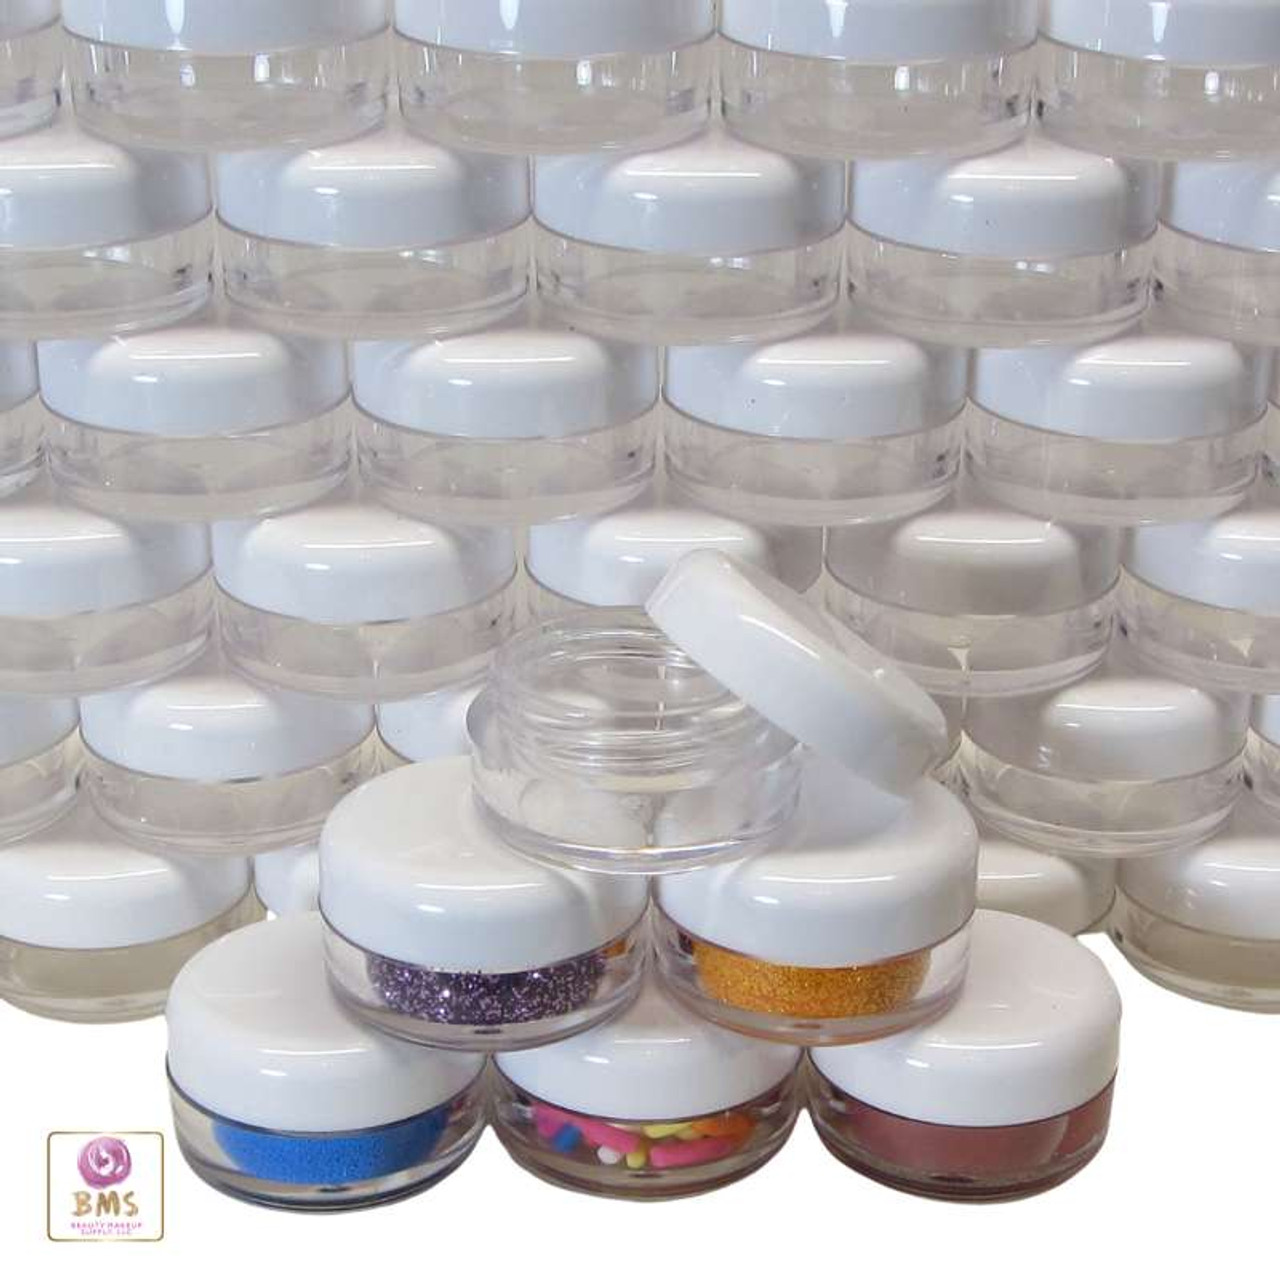 https://cdn11.bigcommerce.com/s-qd7k5gxi/images/stencil/1280x1280/products/363/6823/Makeup-Jars-Empty-Plastic-Lip-Balm-Cosmetic-Containers-5-Gram-Clear-White-Black-Lids-Beauty-Makeup-Supply_6249__33290.1661384475.jpg?c=2?imbypass=on